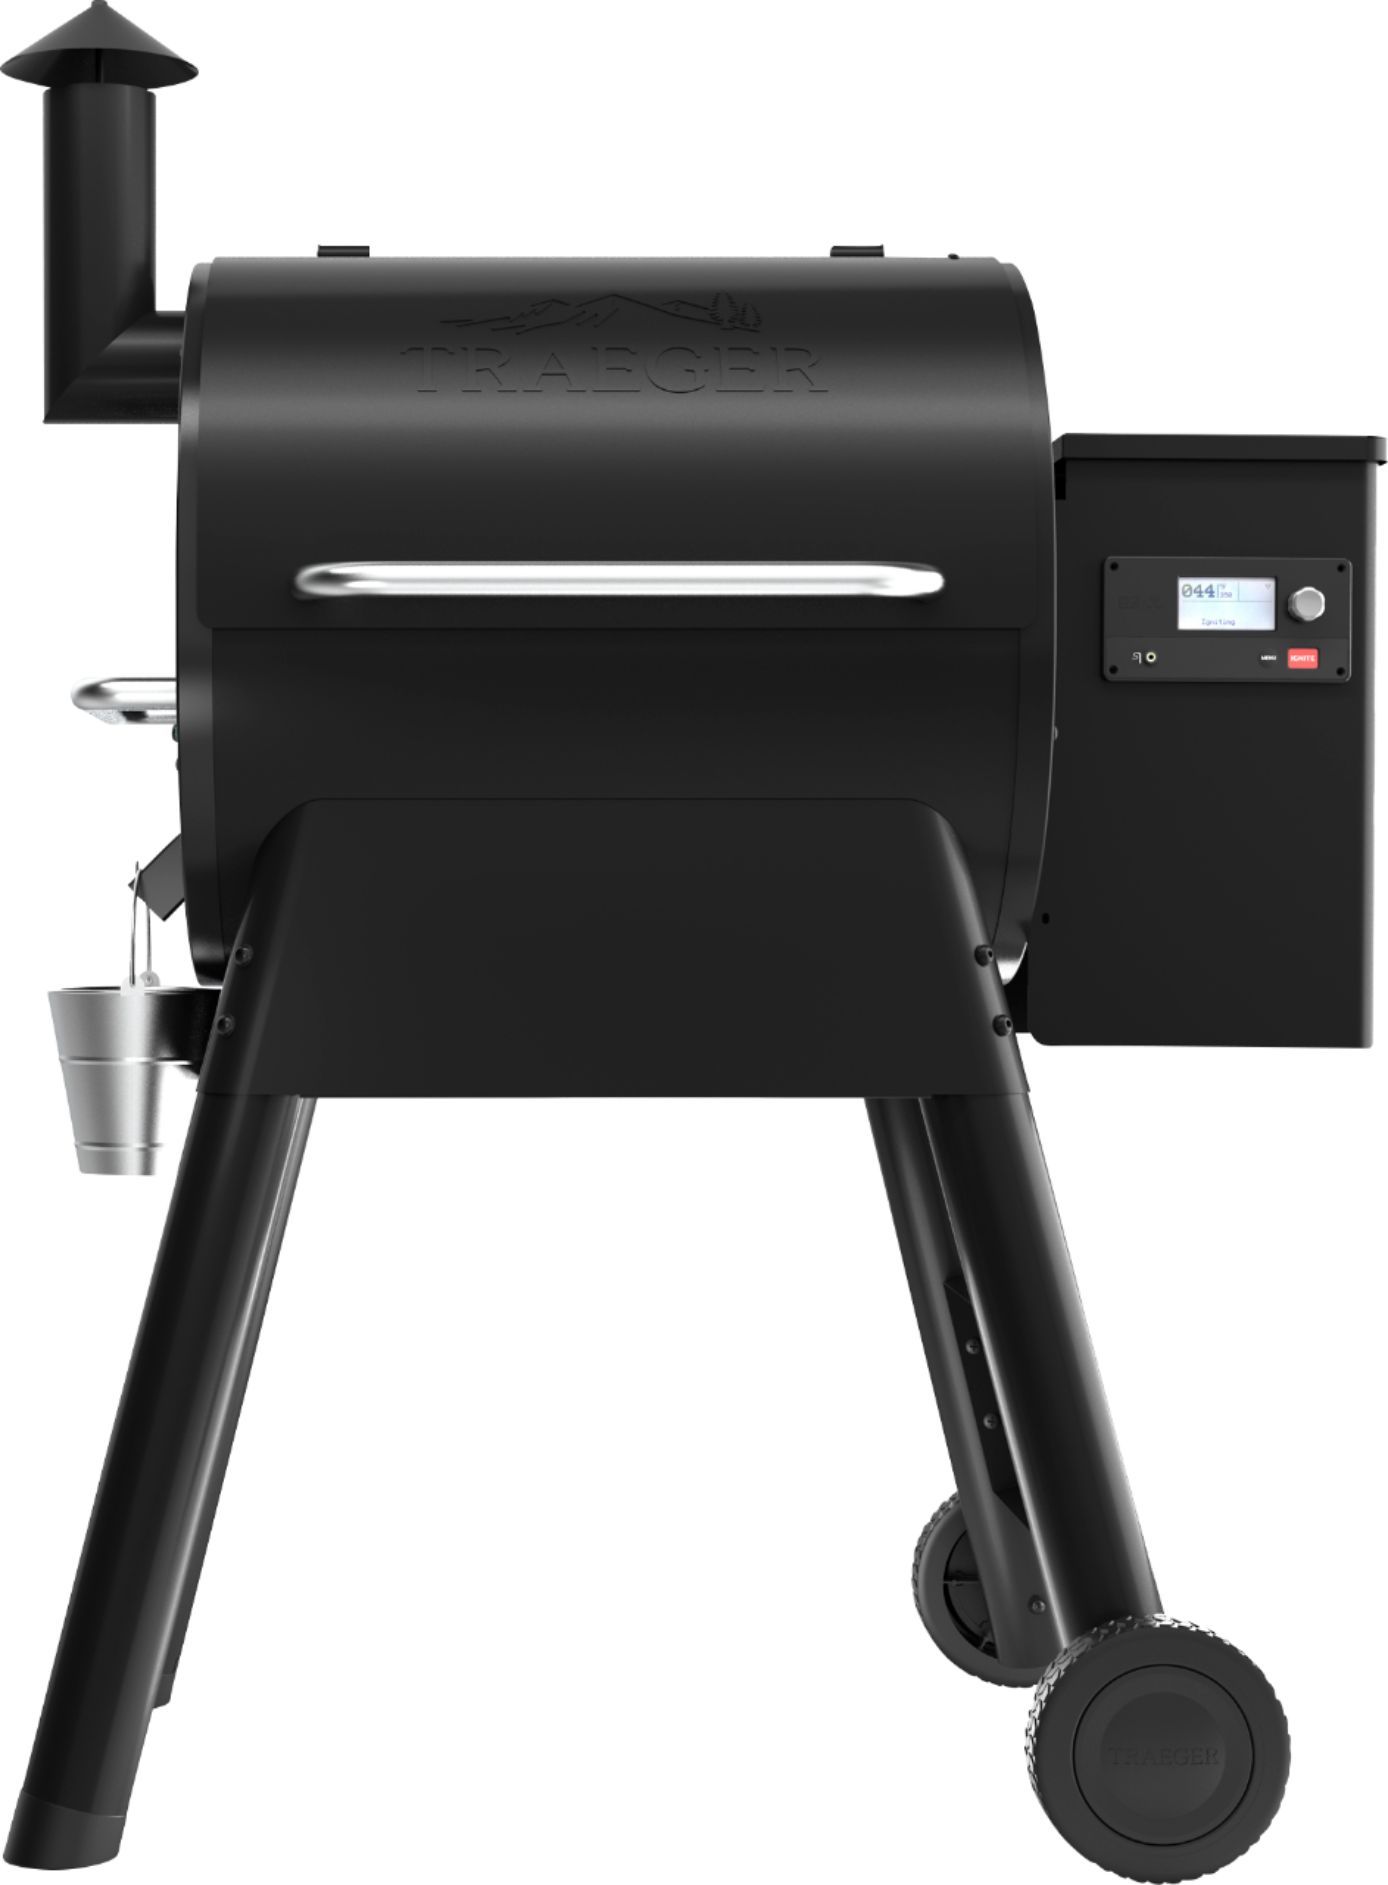 Traeger Grills Pro 575 Pellet Grill and Smoker with WiFIRE Black TFB57GLE - Best Buy | Best Buy U.S.